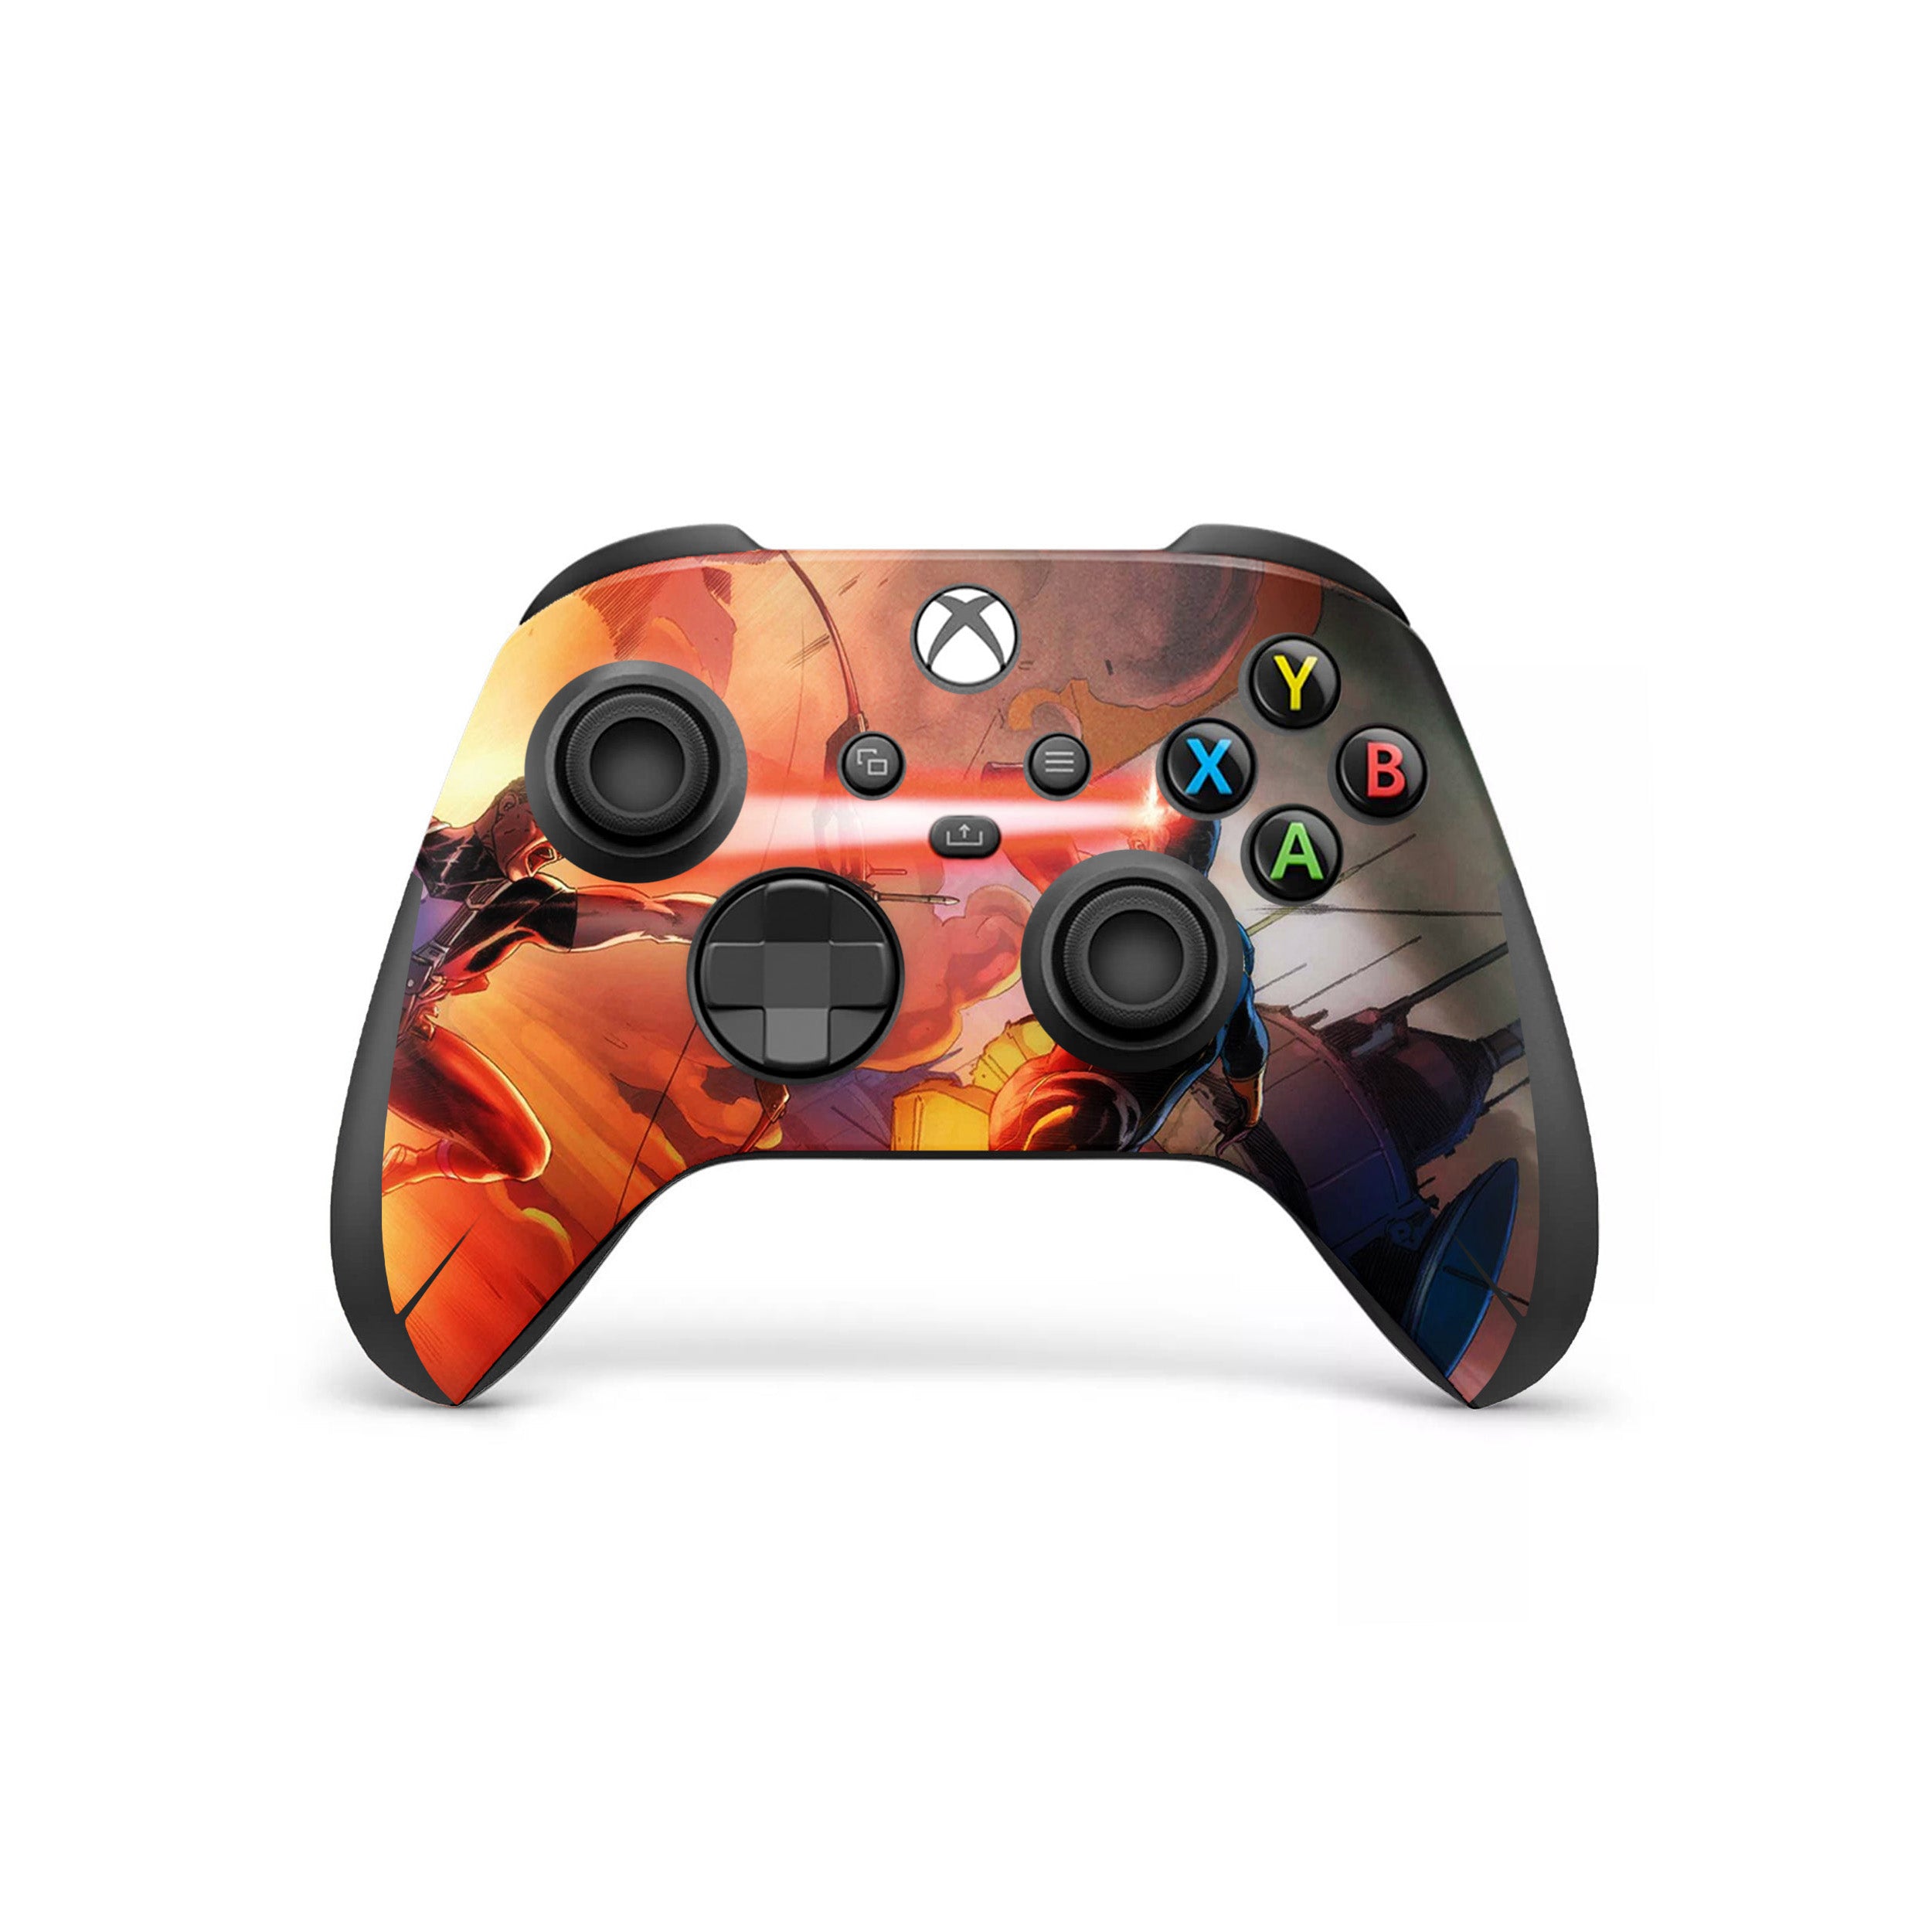 A video game skin featuring a Marvel X Men Cyclops design for the Xbox Wireless Controller.